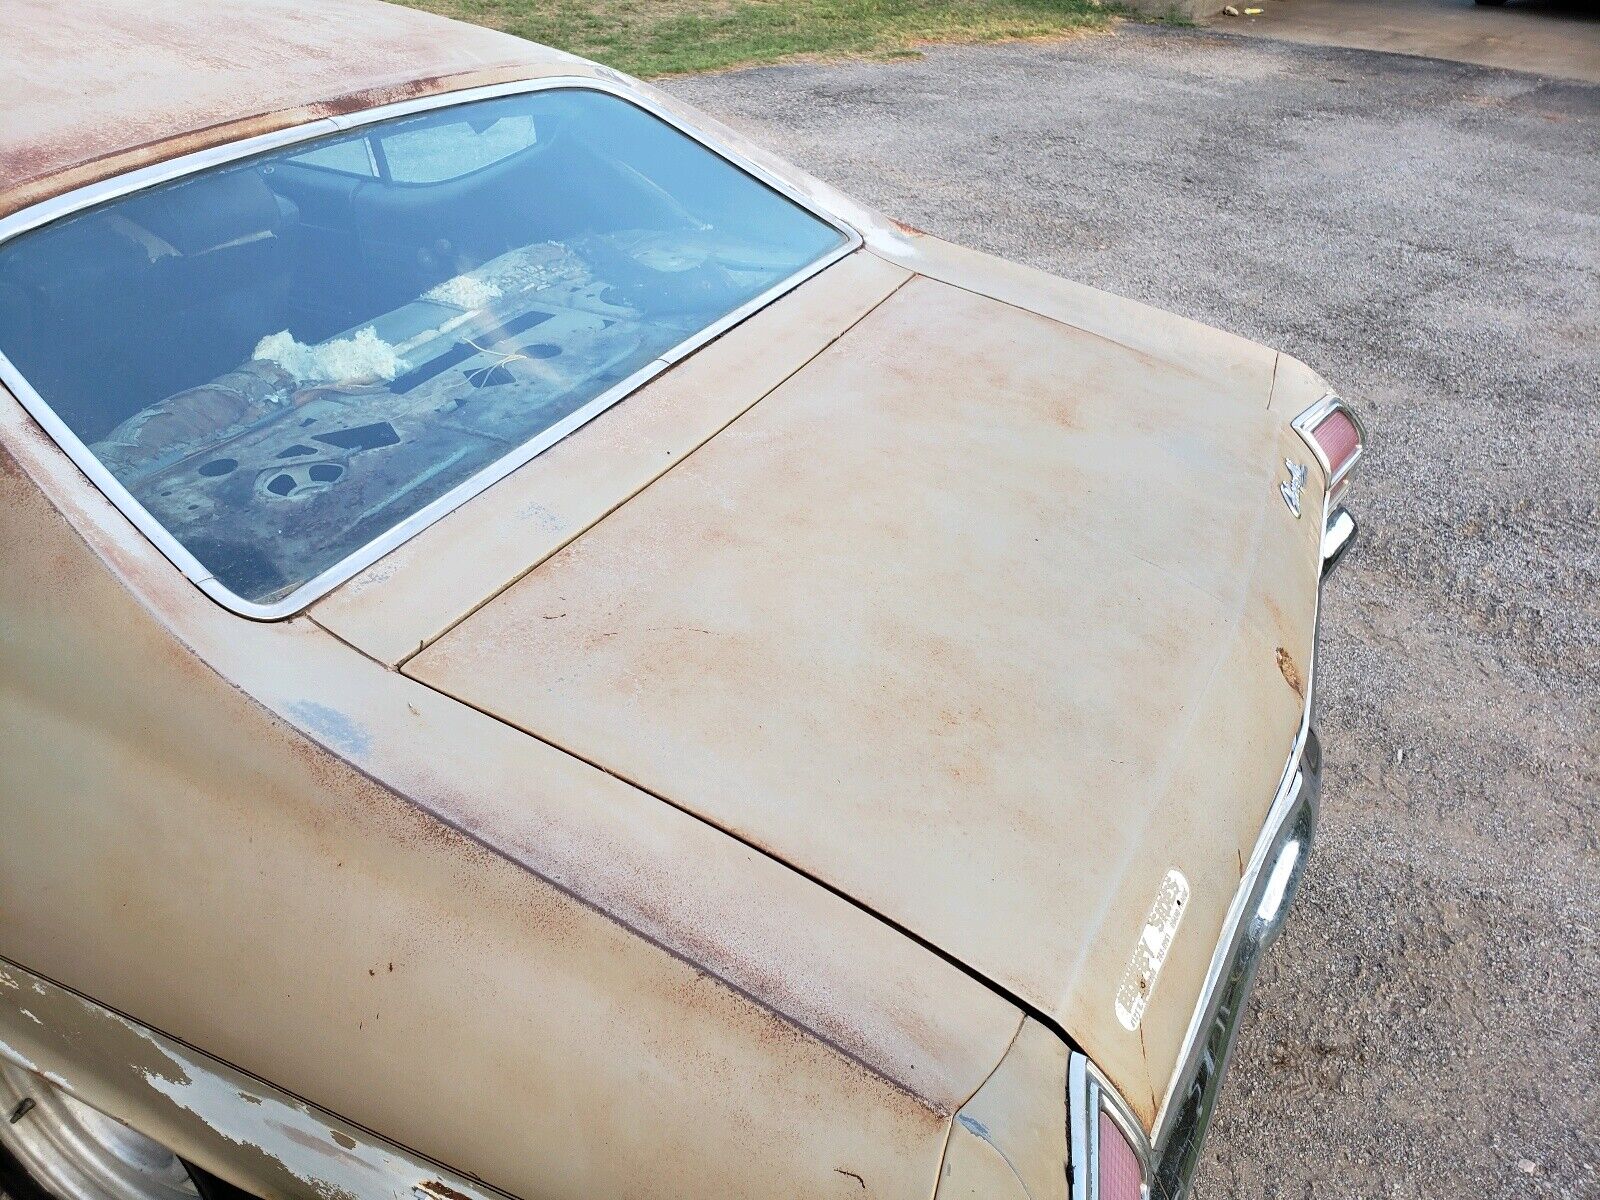 Parked 38 Years Ago: 1969 Chevelle Proves Detroit Metal Loves Texas Weather...